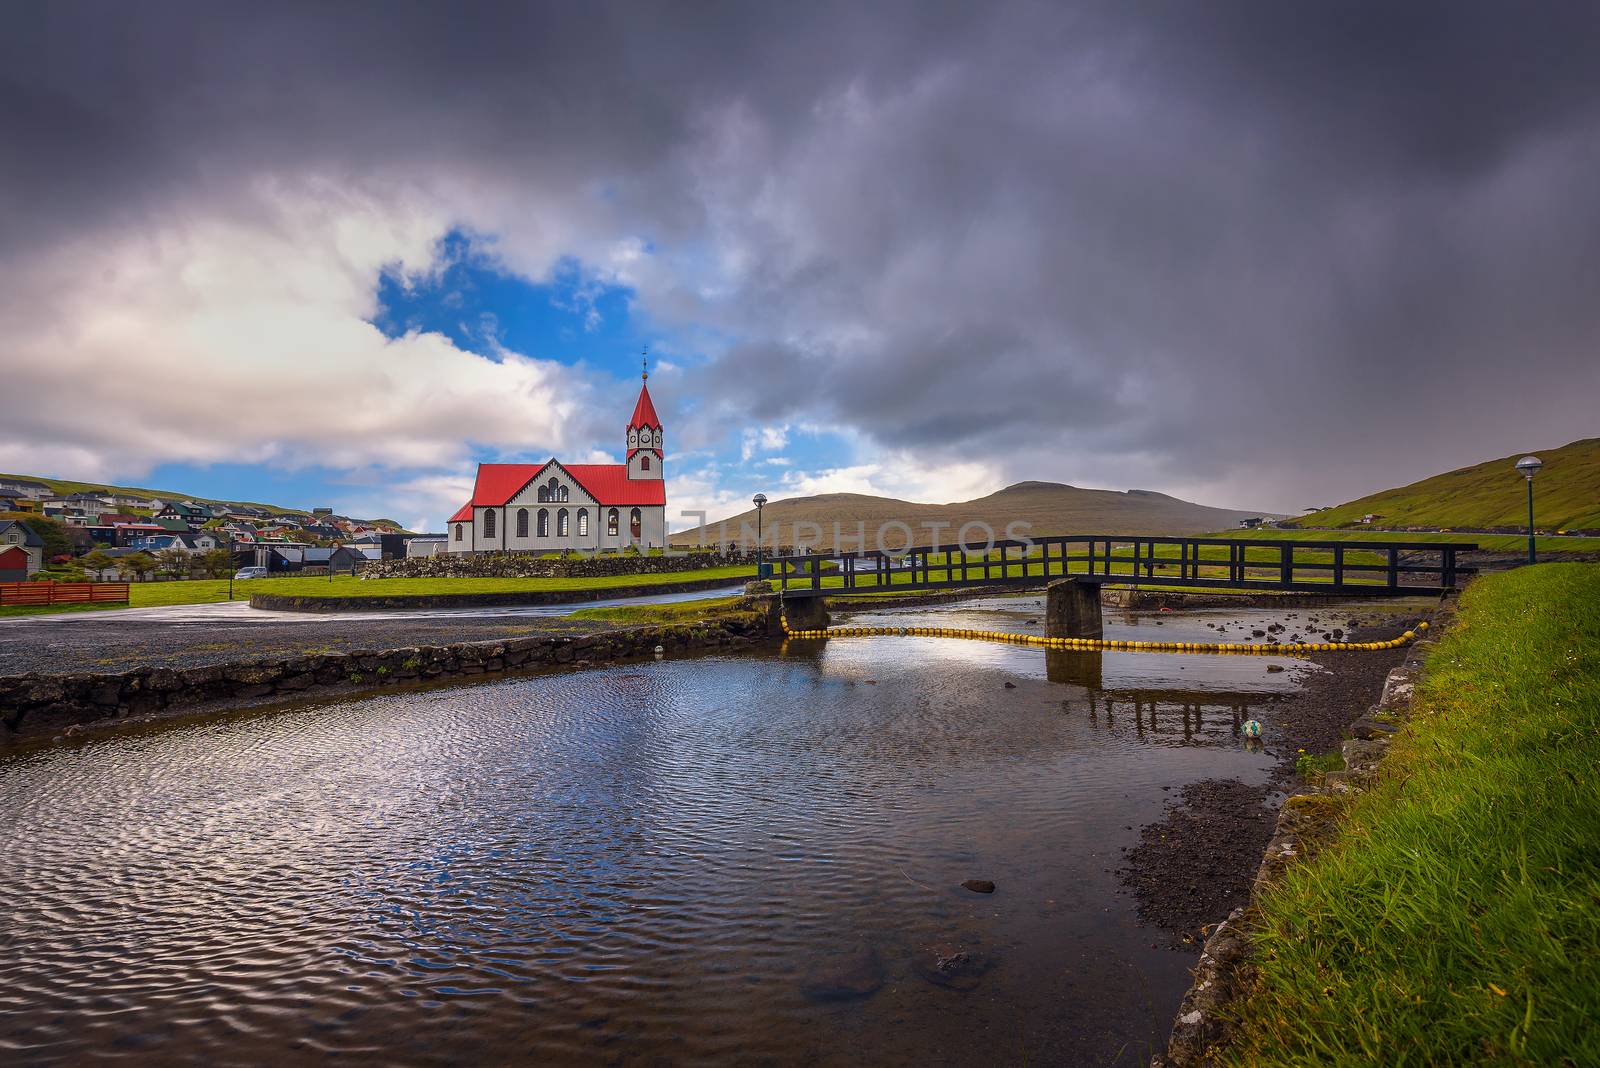 Church and the river Stora located in Sandavagur on Faroe Islands, Denmark by nickfox